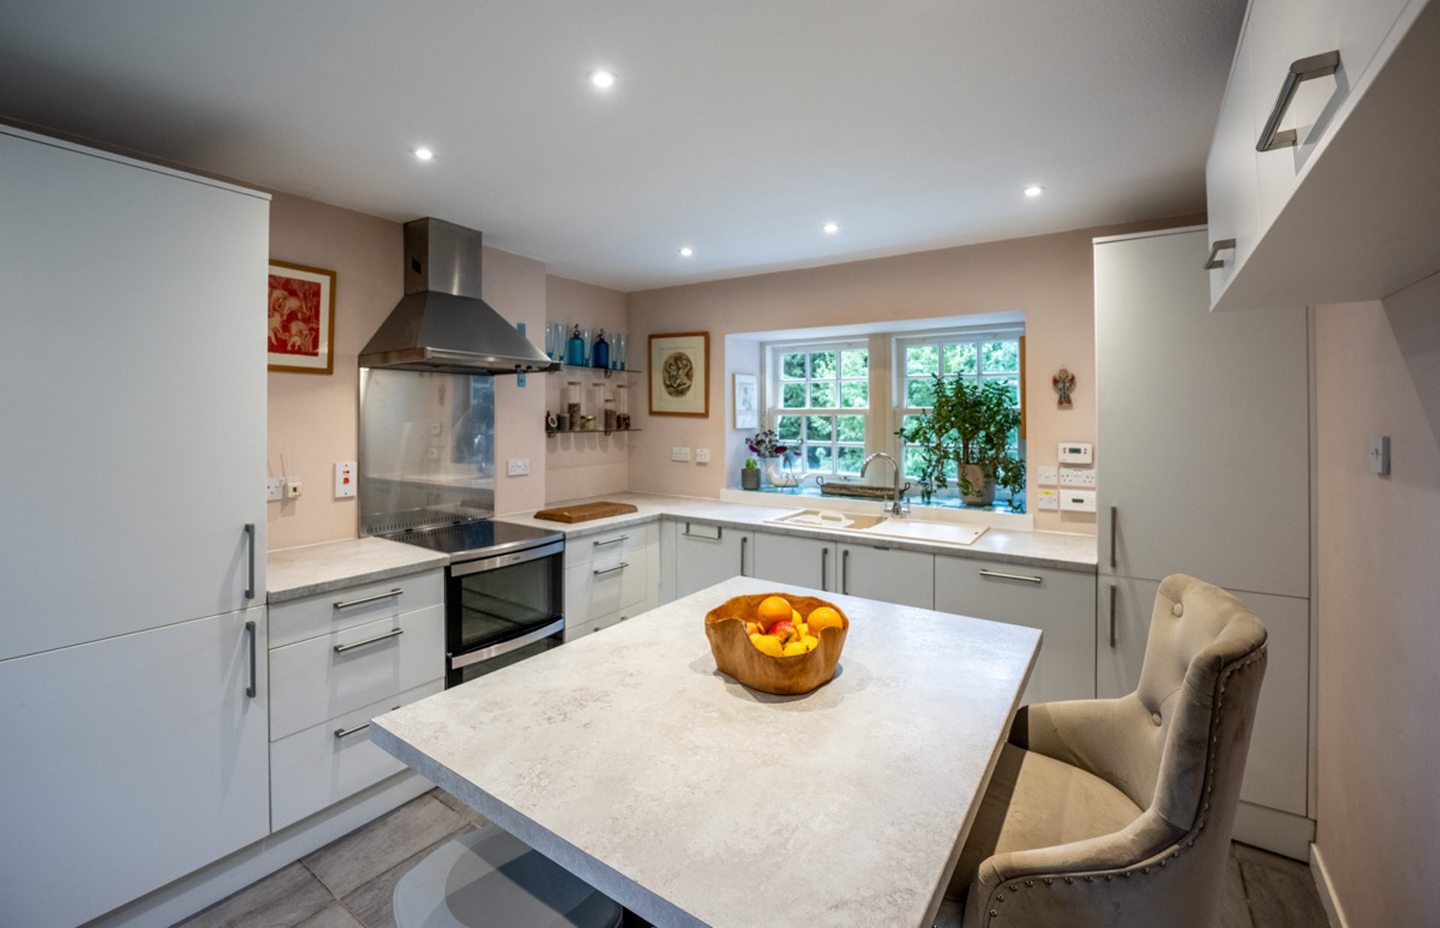 The kitchen in the lodge and creamery in Torphins which features white cabinets, cream marble countertops, steel and black oven with a hood and a kitchen island with barstools